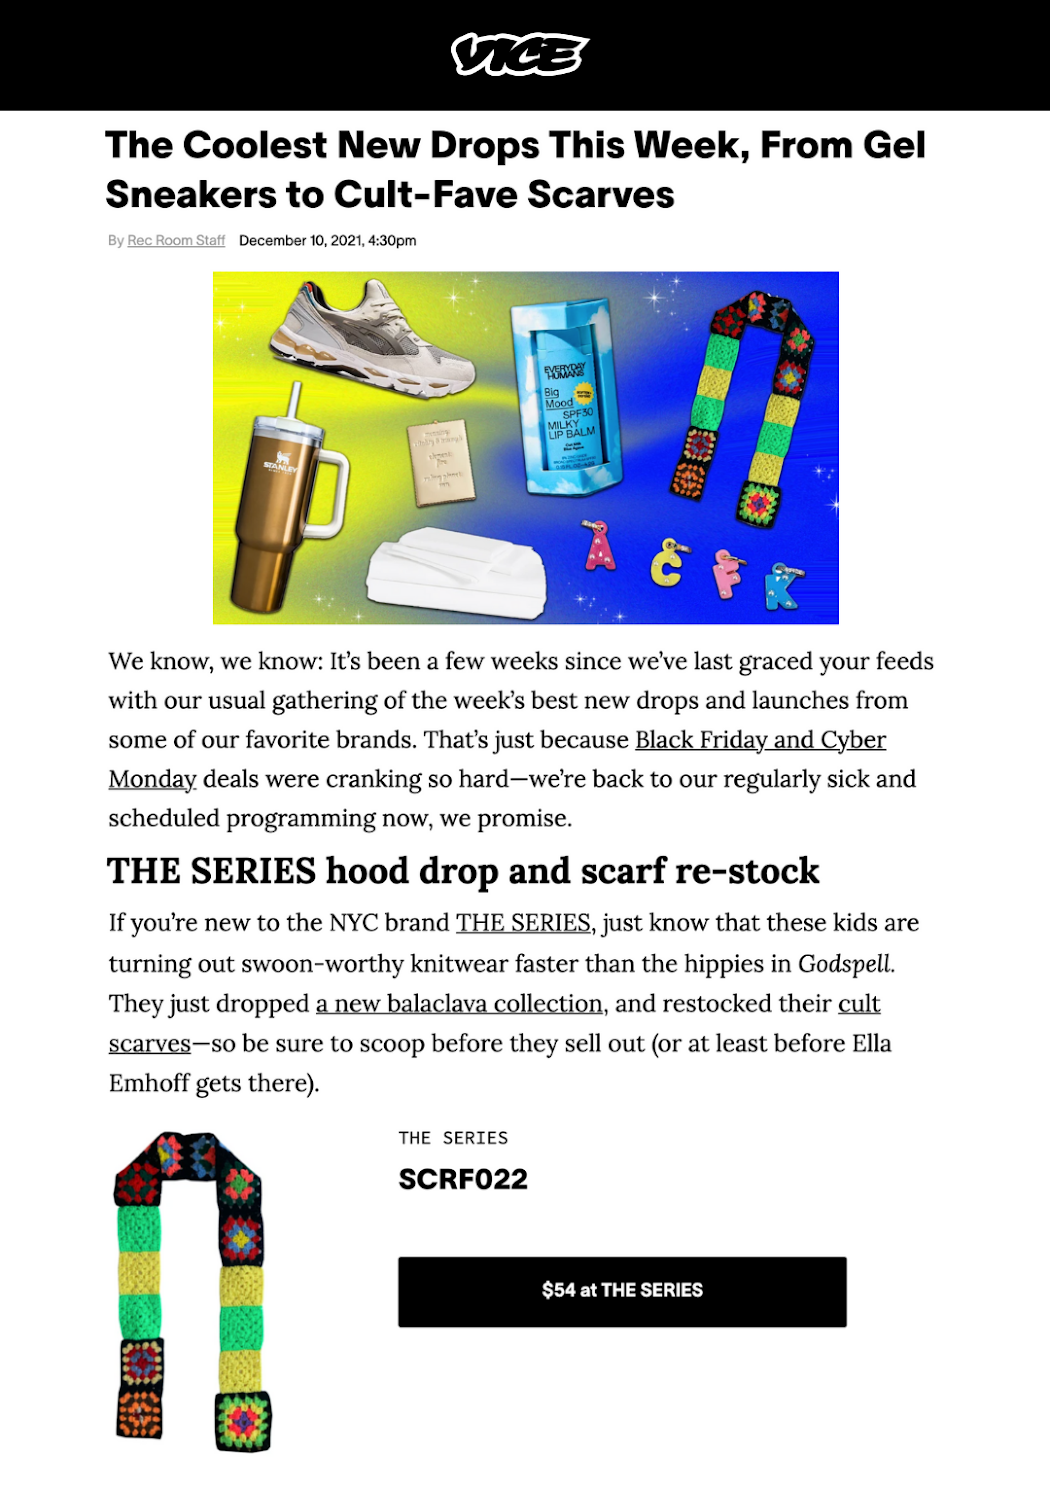 VICE | The Coolest New Drops This Week, From Gel Sneakers to Cult-Fave Scarves